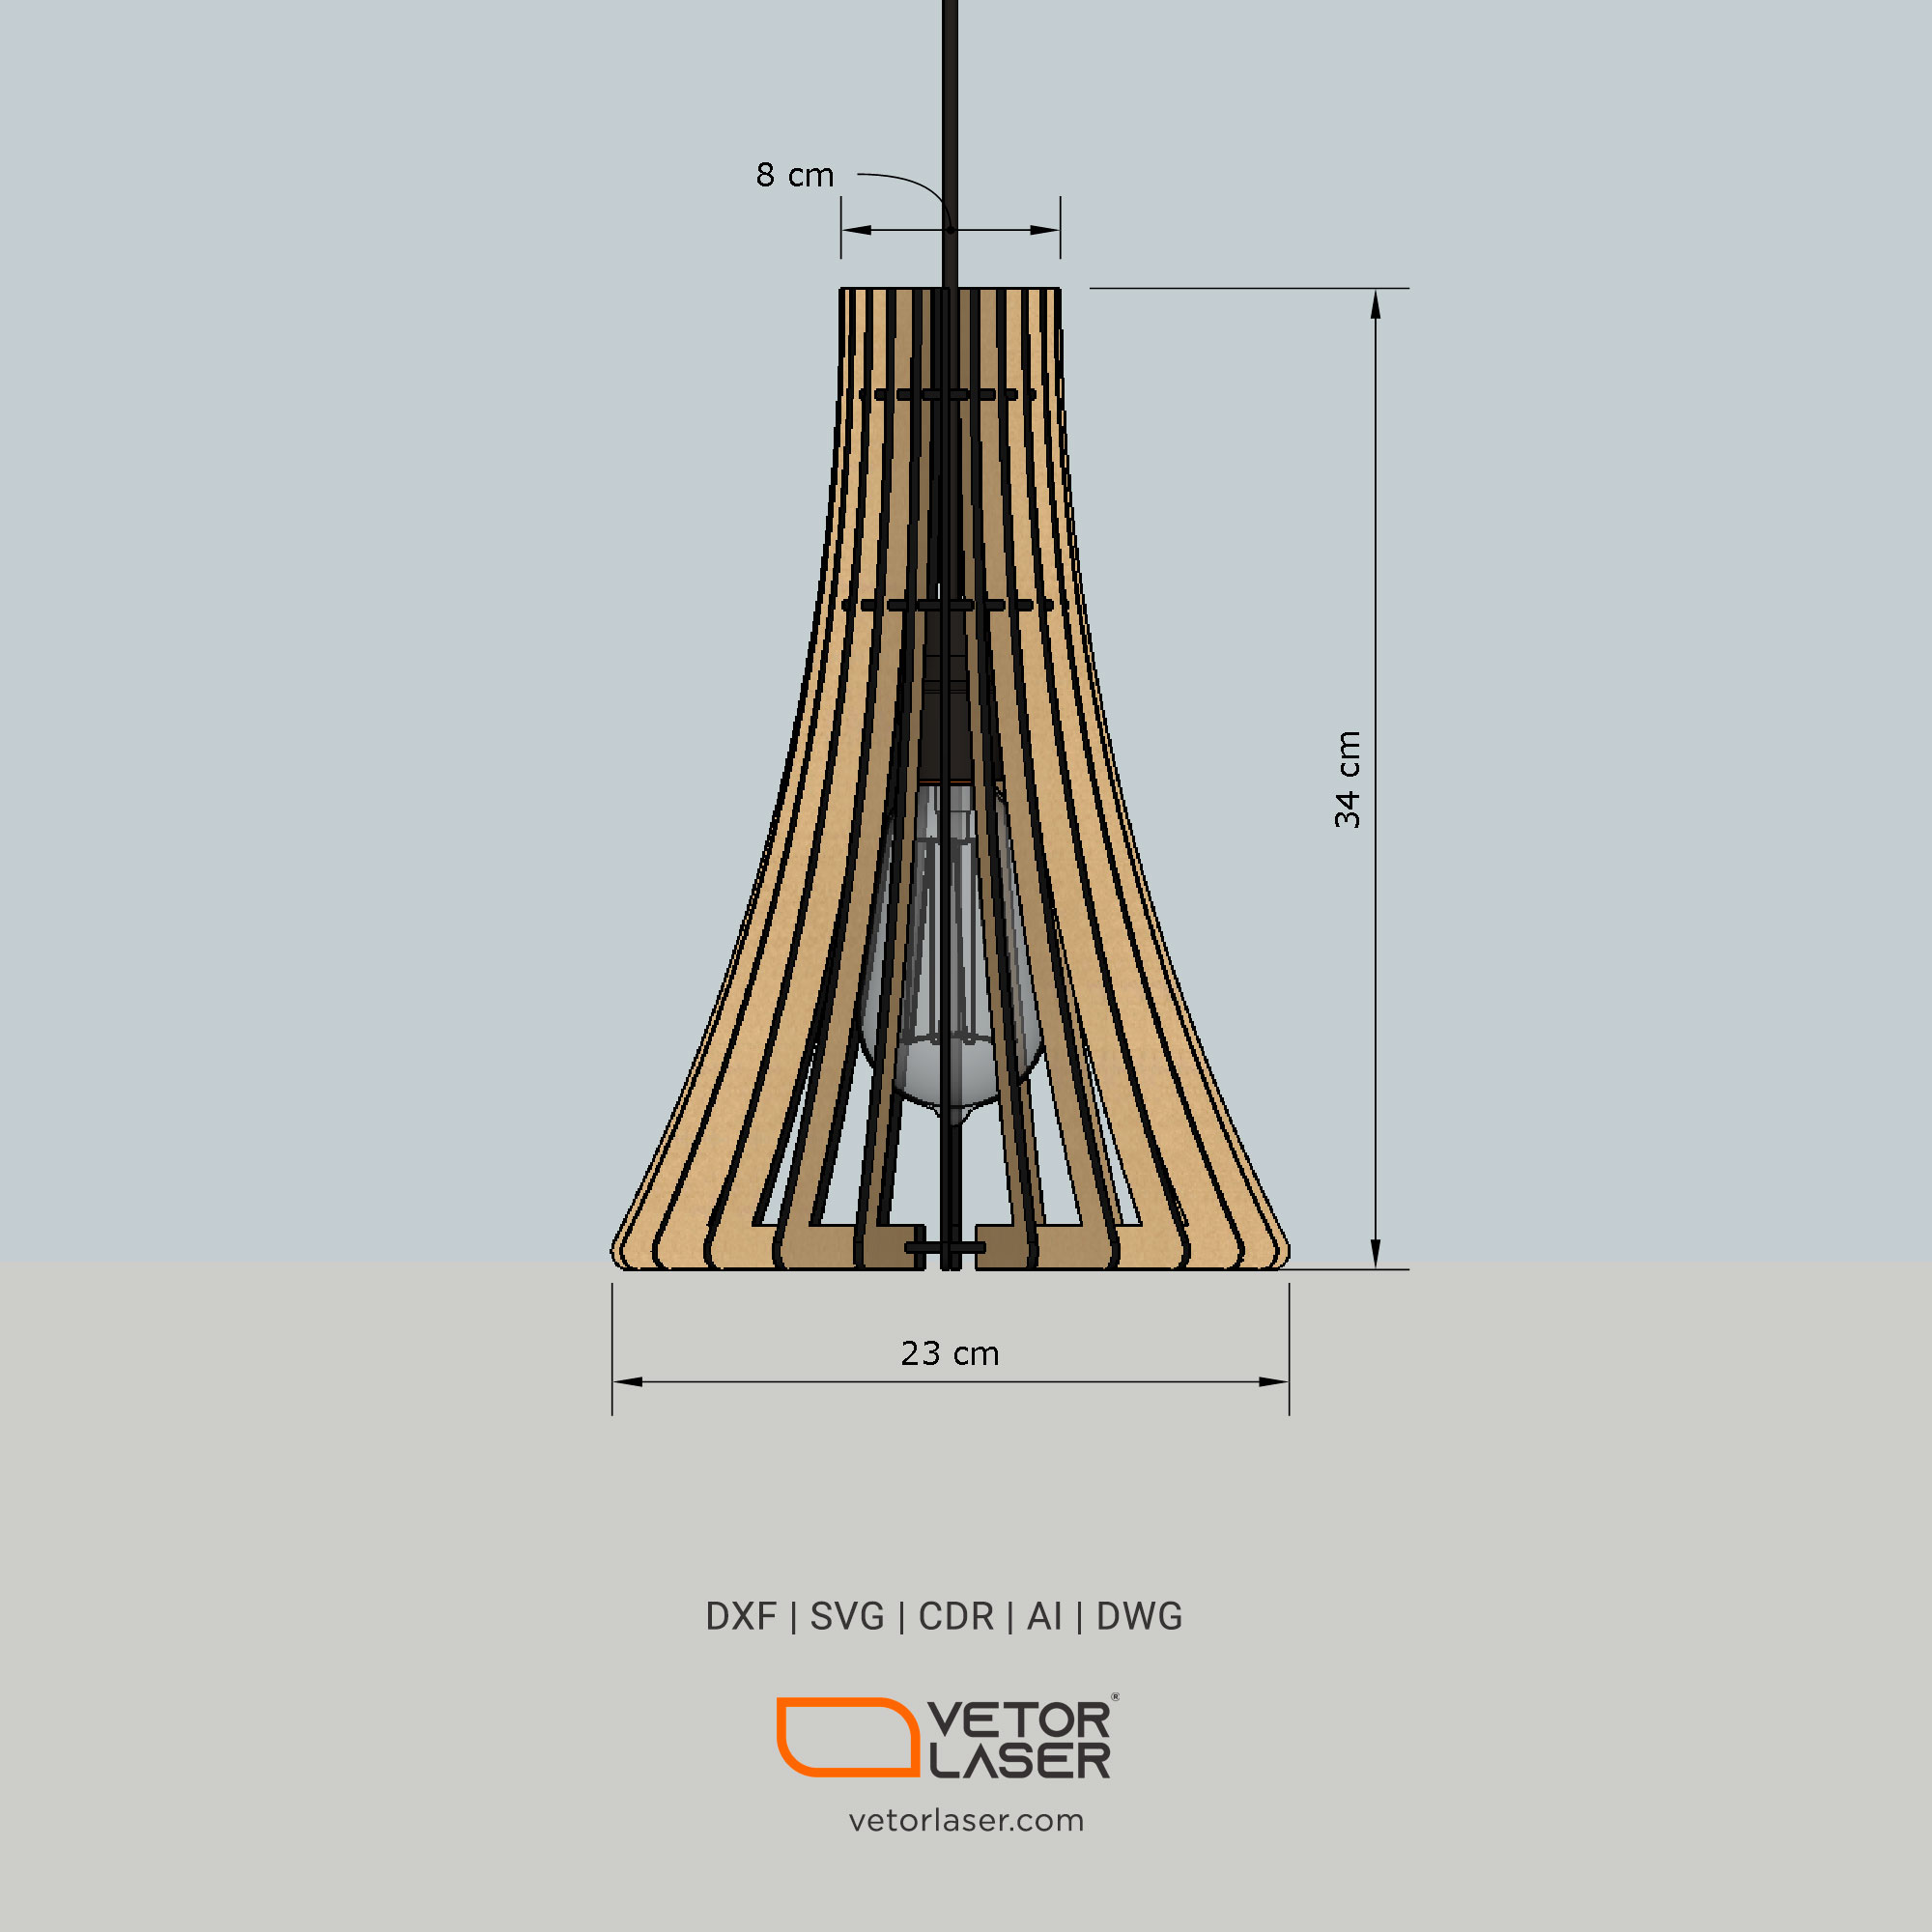 Laser Cut File Pendant Ceiling Lights Project Template SVG DXF – VLP8321 - Laser  Cut Files Projects DXF and SVG